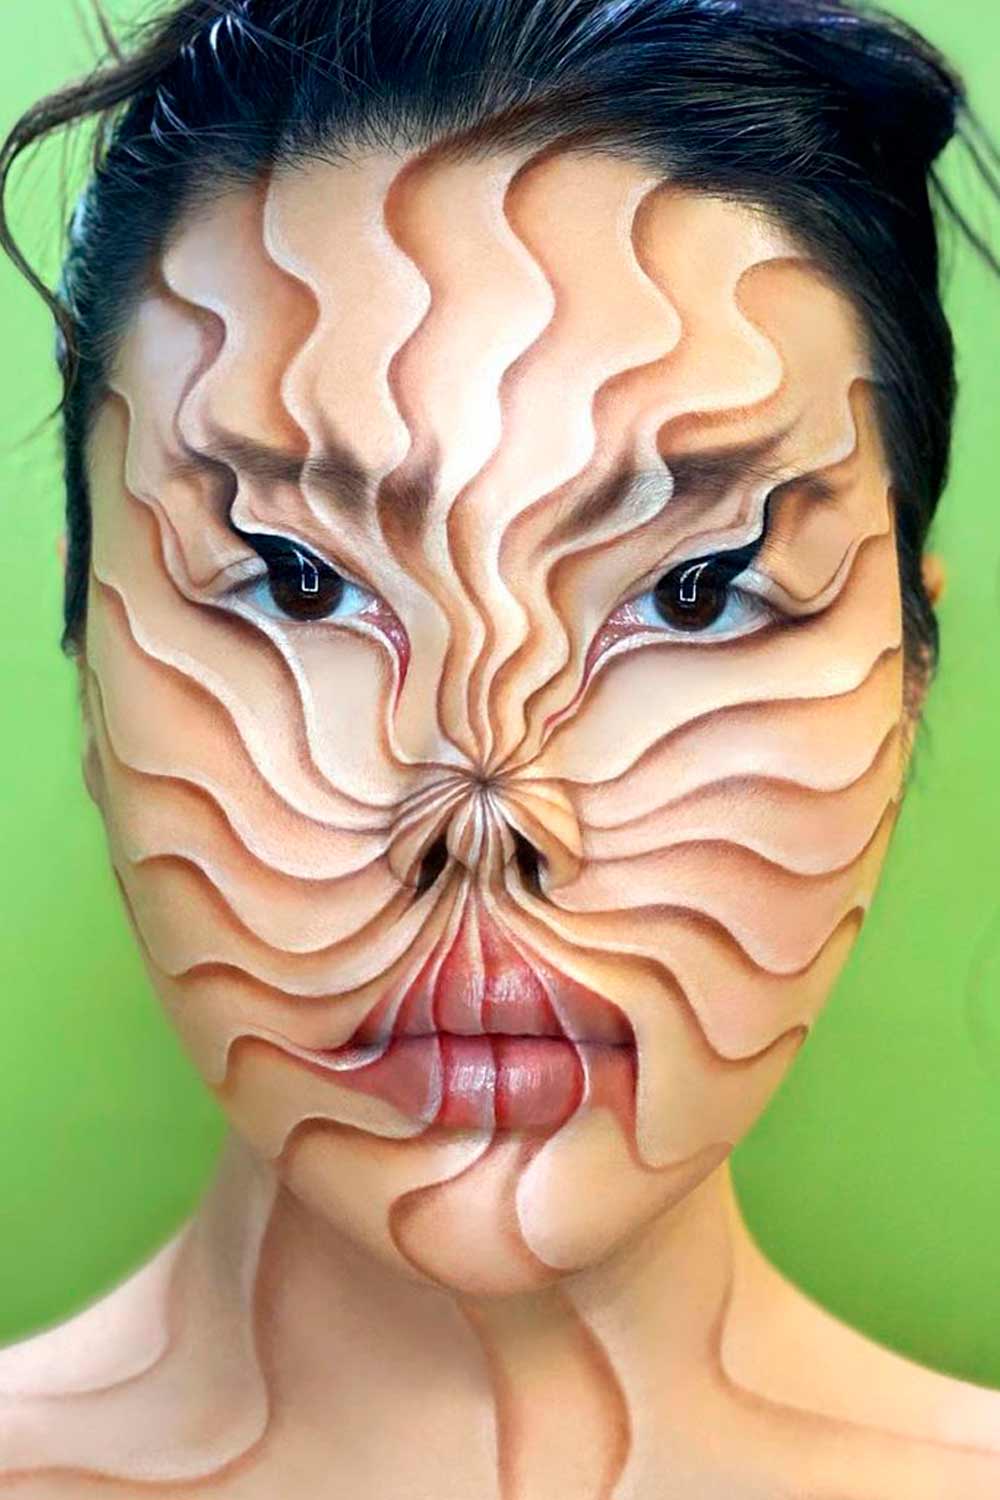 Mind-Boggling “Cracked Face” Halloween Looks